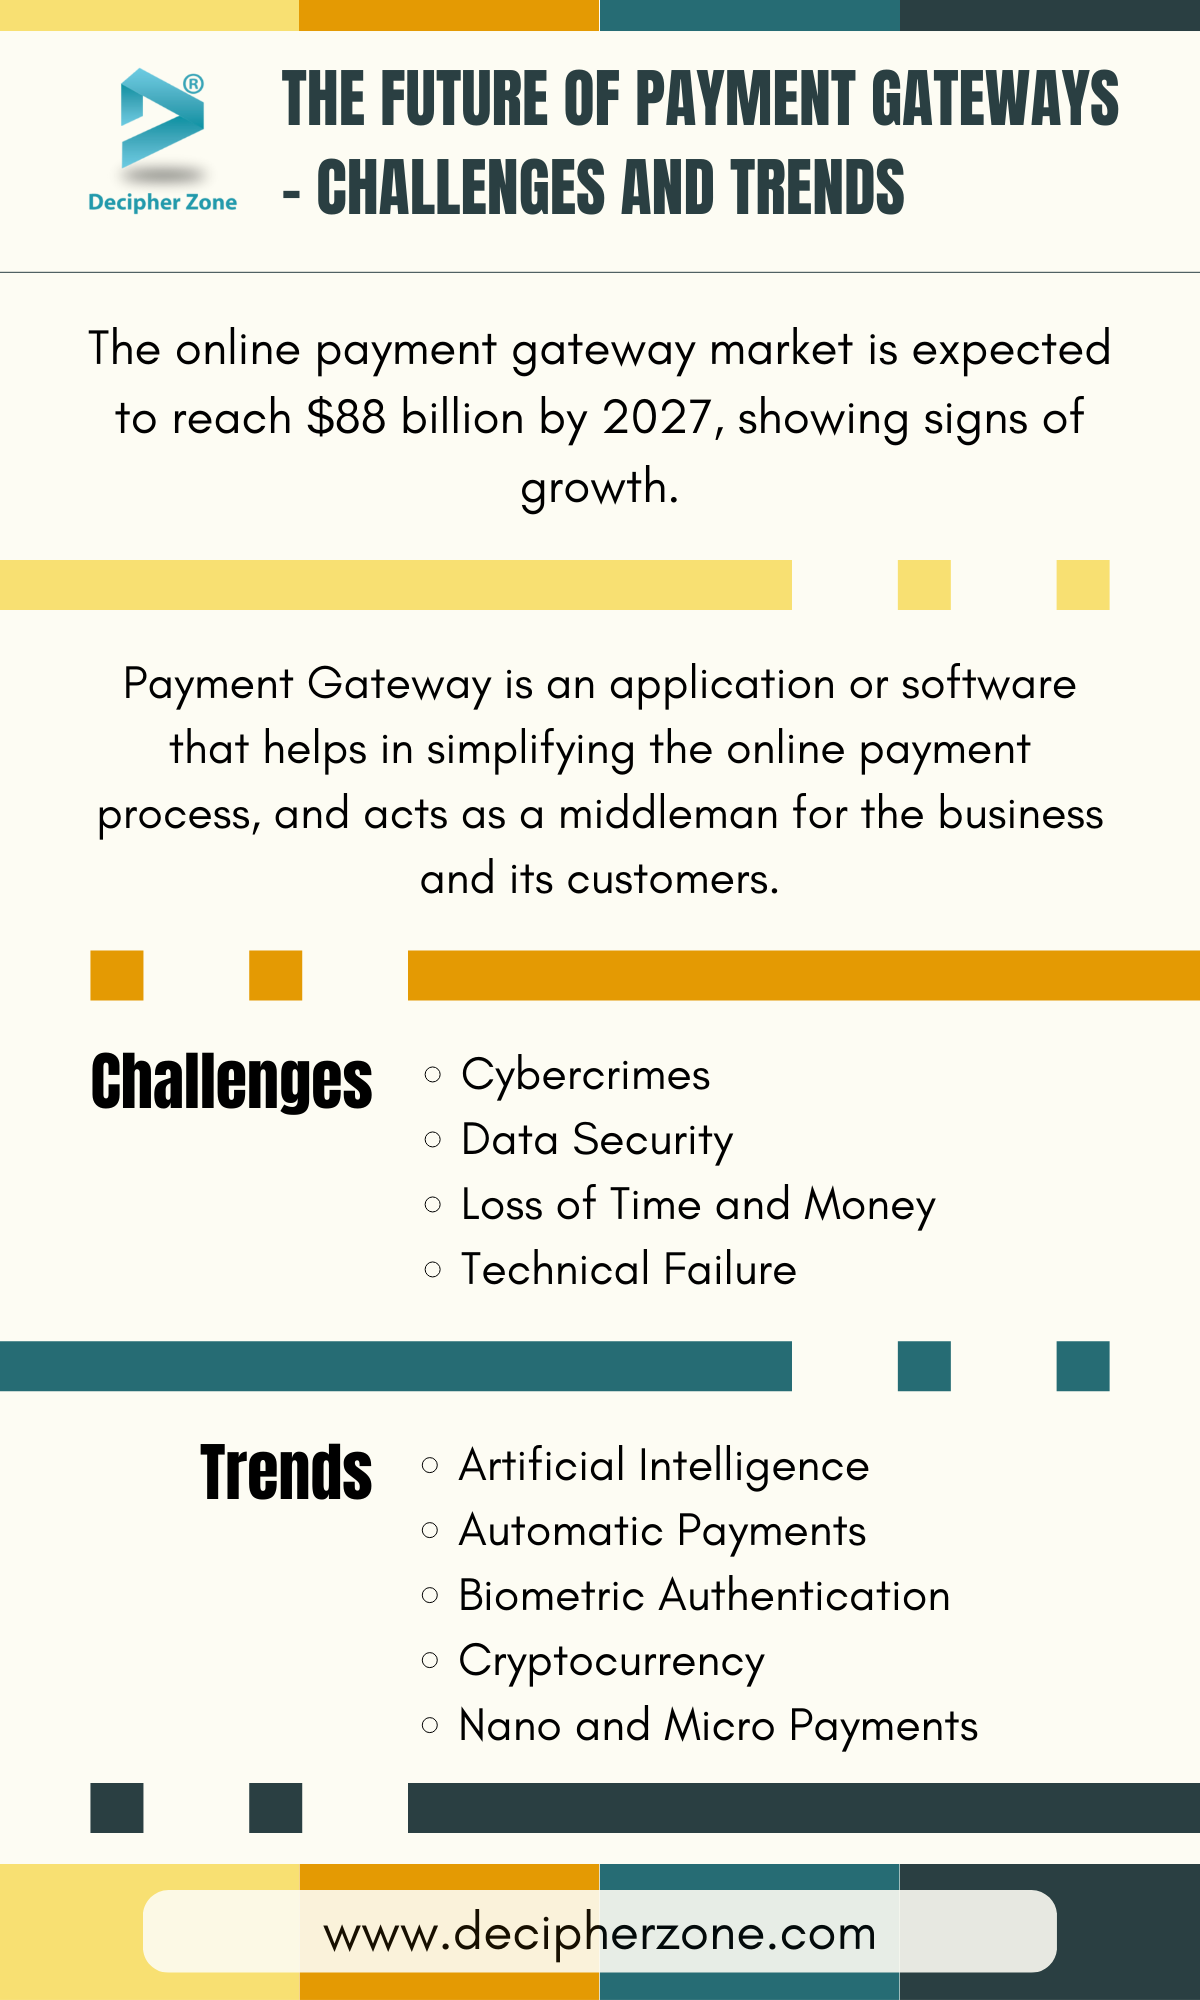 Payment Gateways - Challenges and Trends